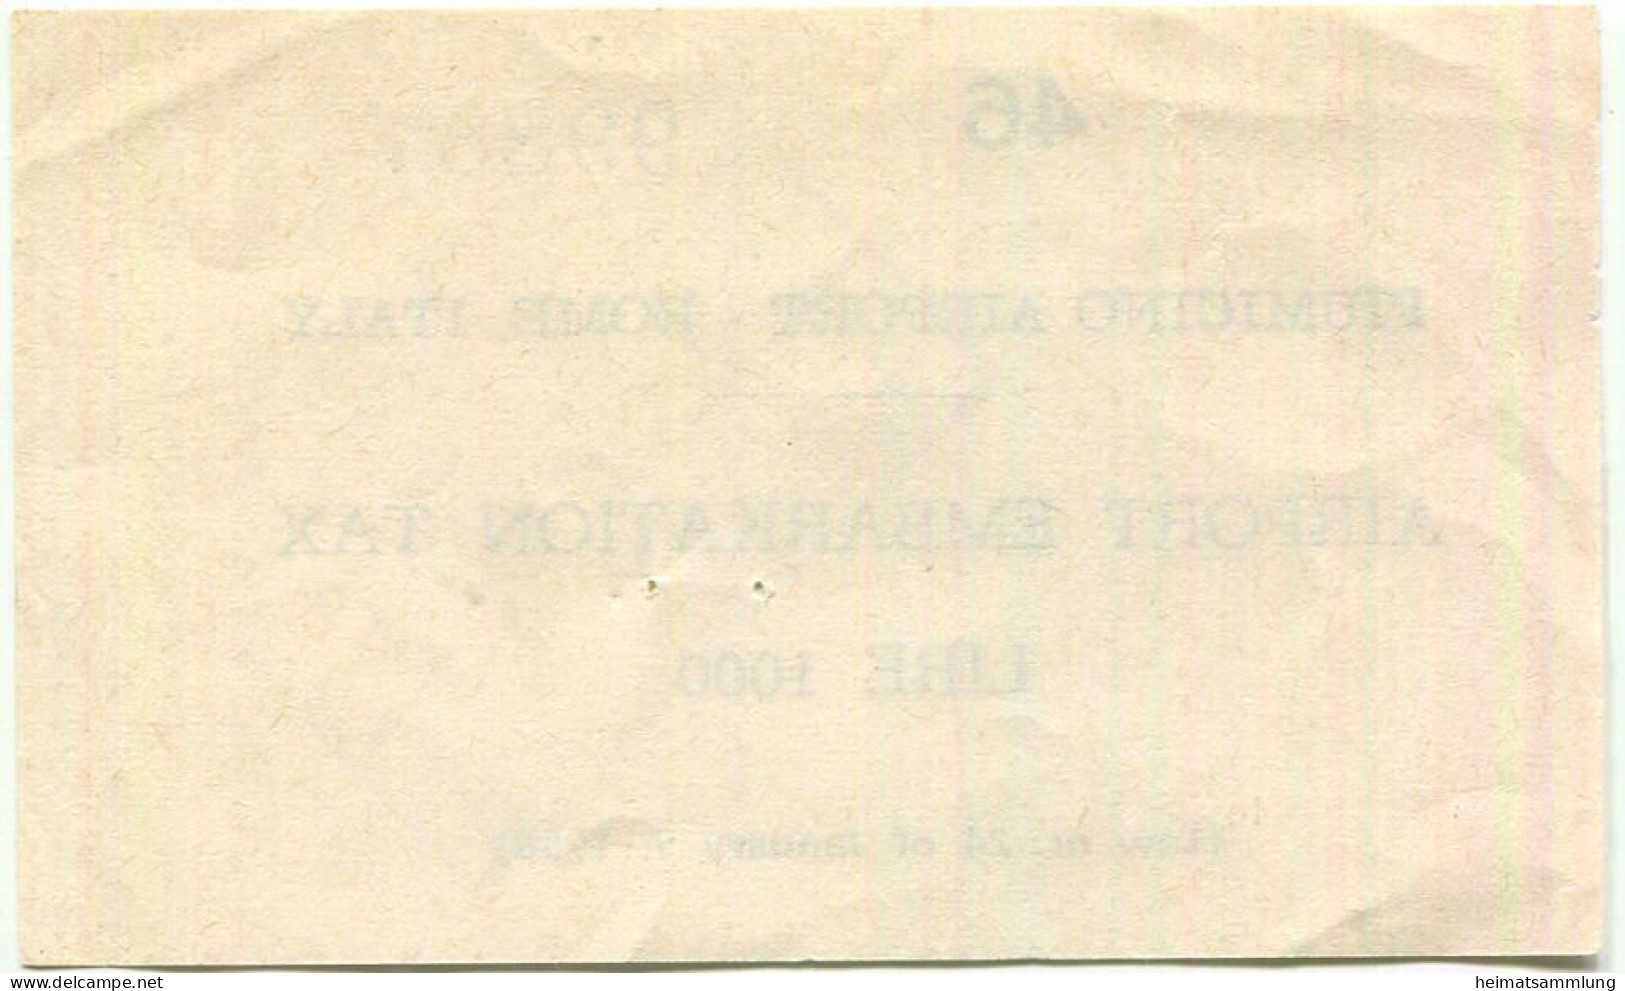 Italien - Fiumicino Airport Rome Italy - Airport Embarkation Tax Lire 1000 1968 - Europe